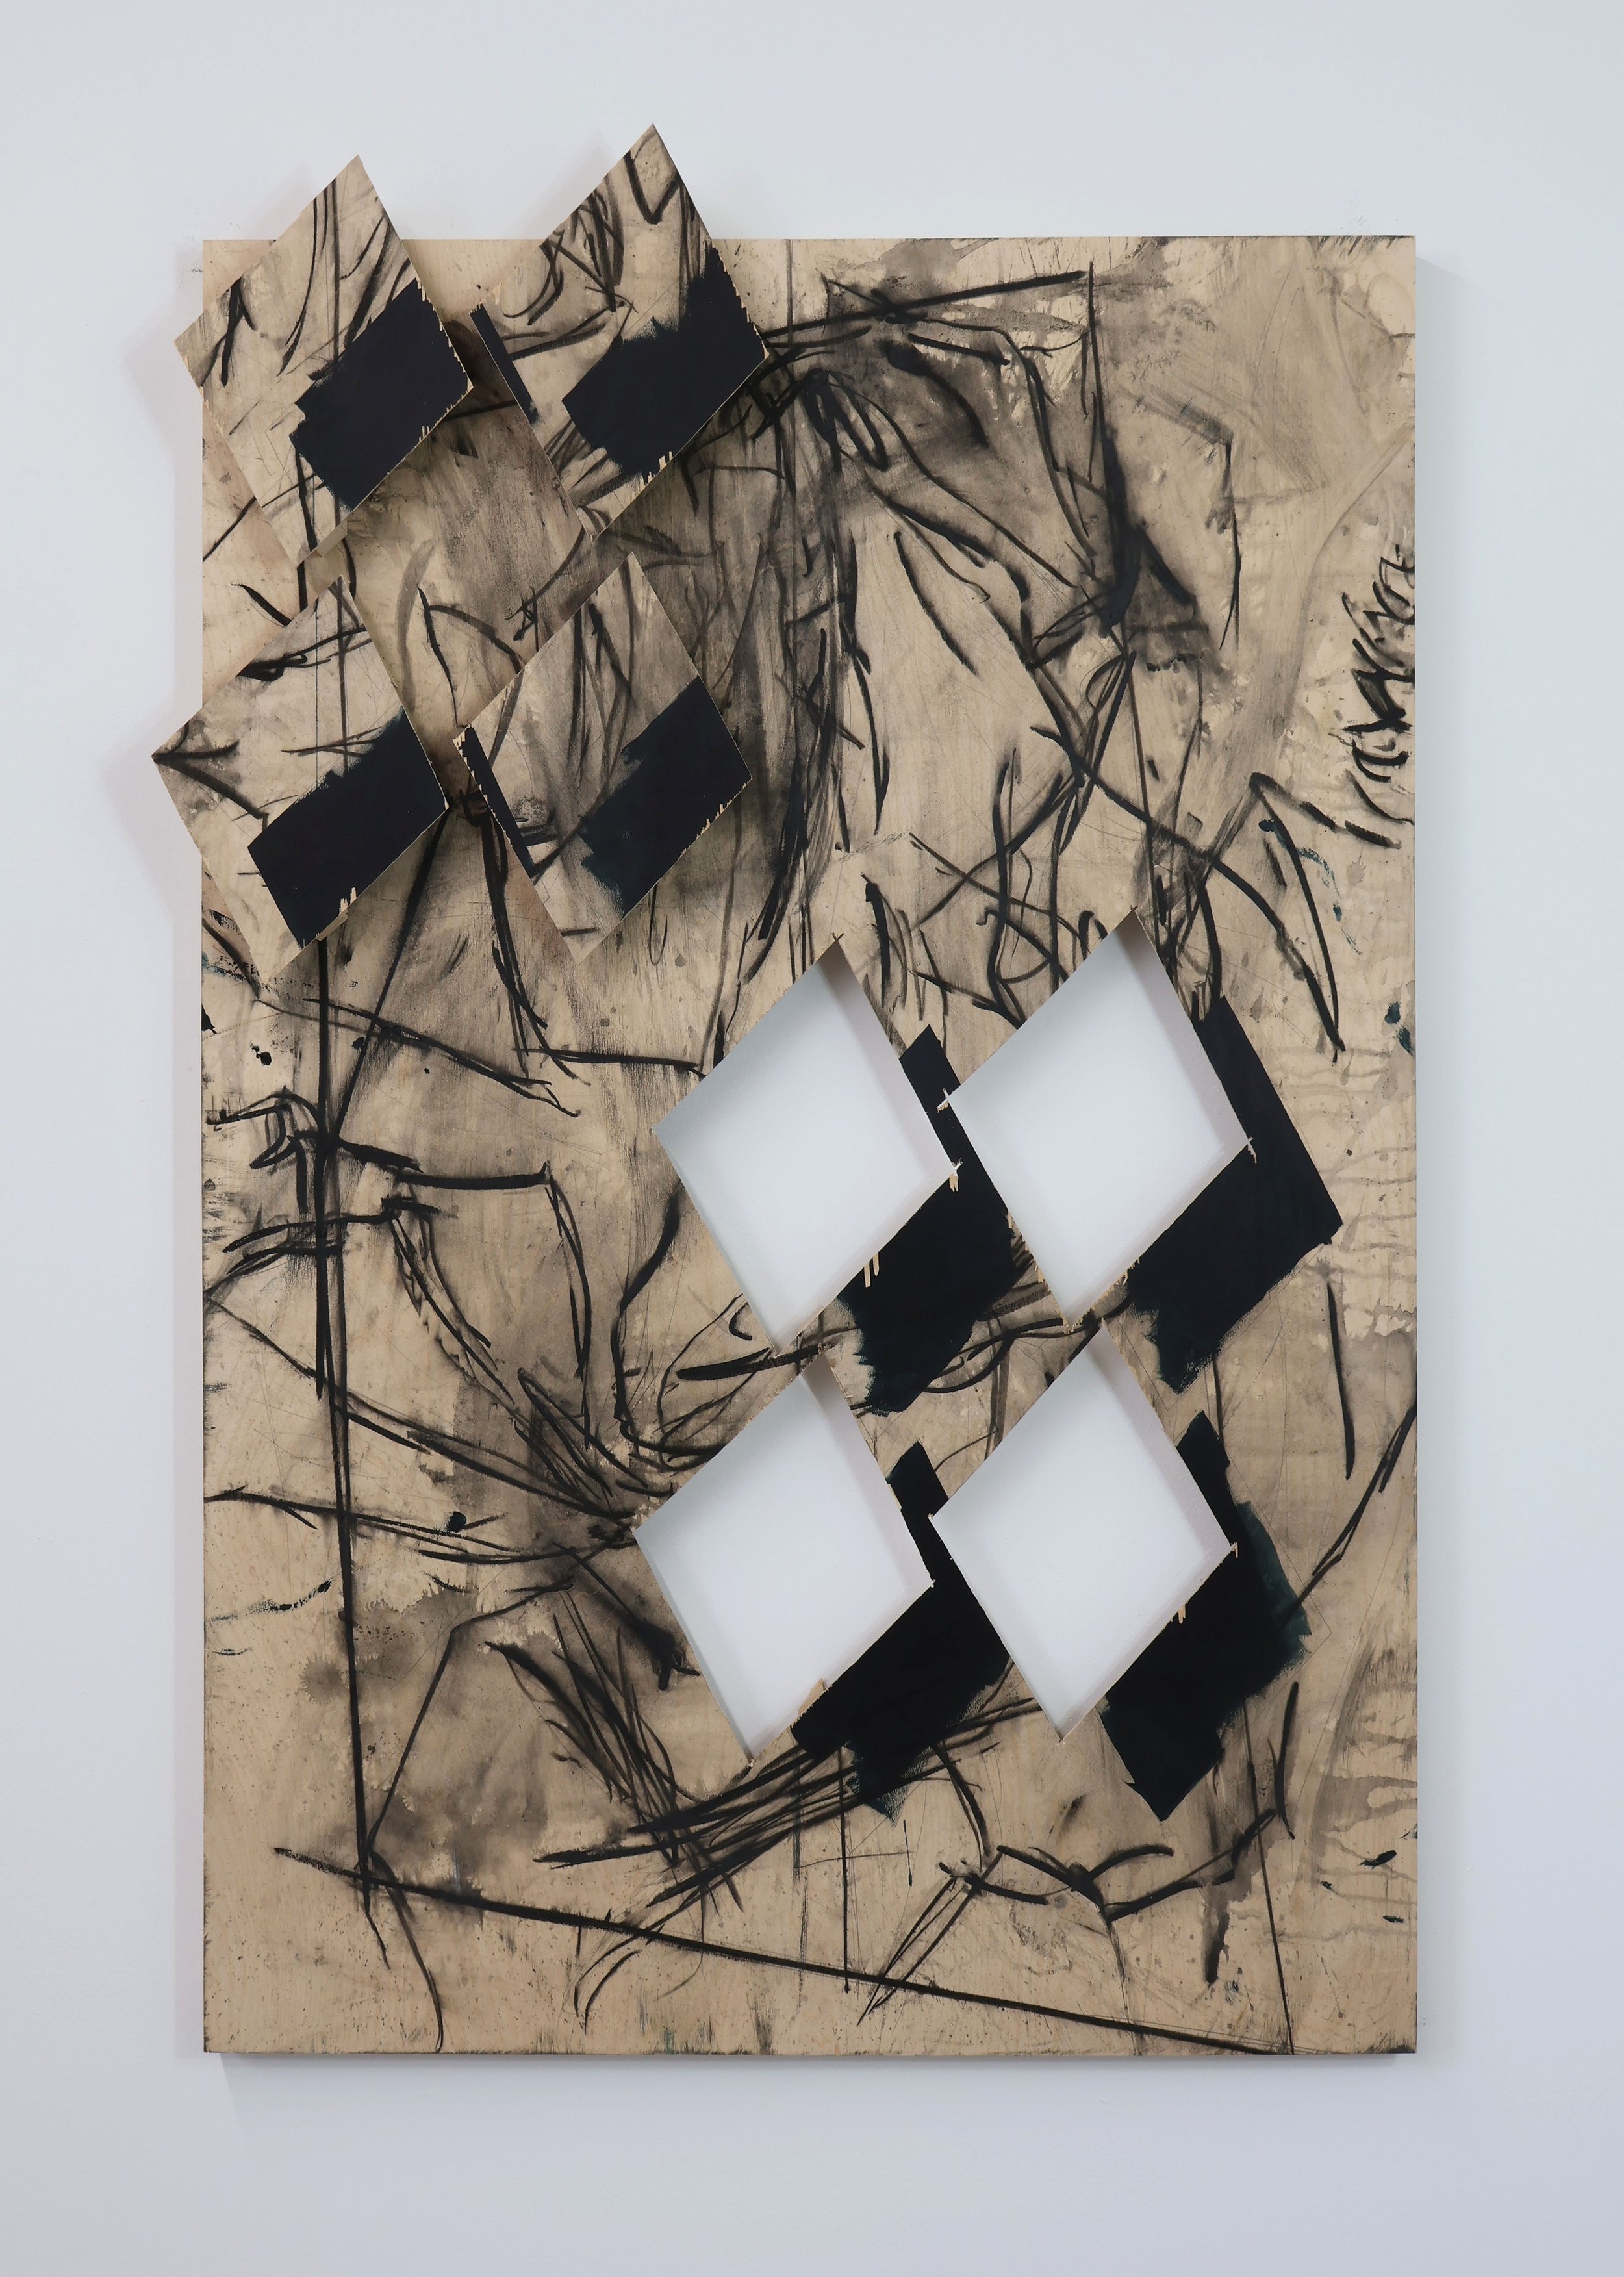  Untitled  Acrylic, charcoal, graphite pencil on wood panel.   64 x 42 x 2 in.  2022 